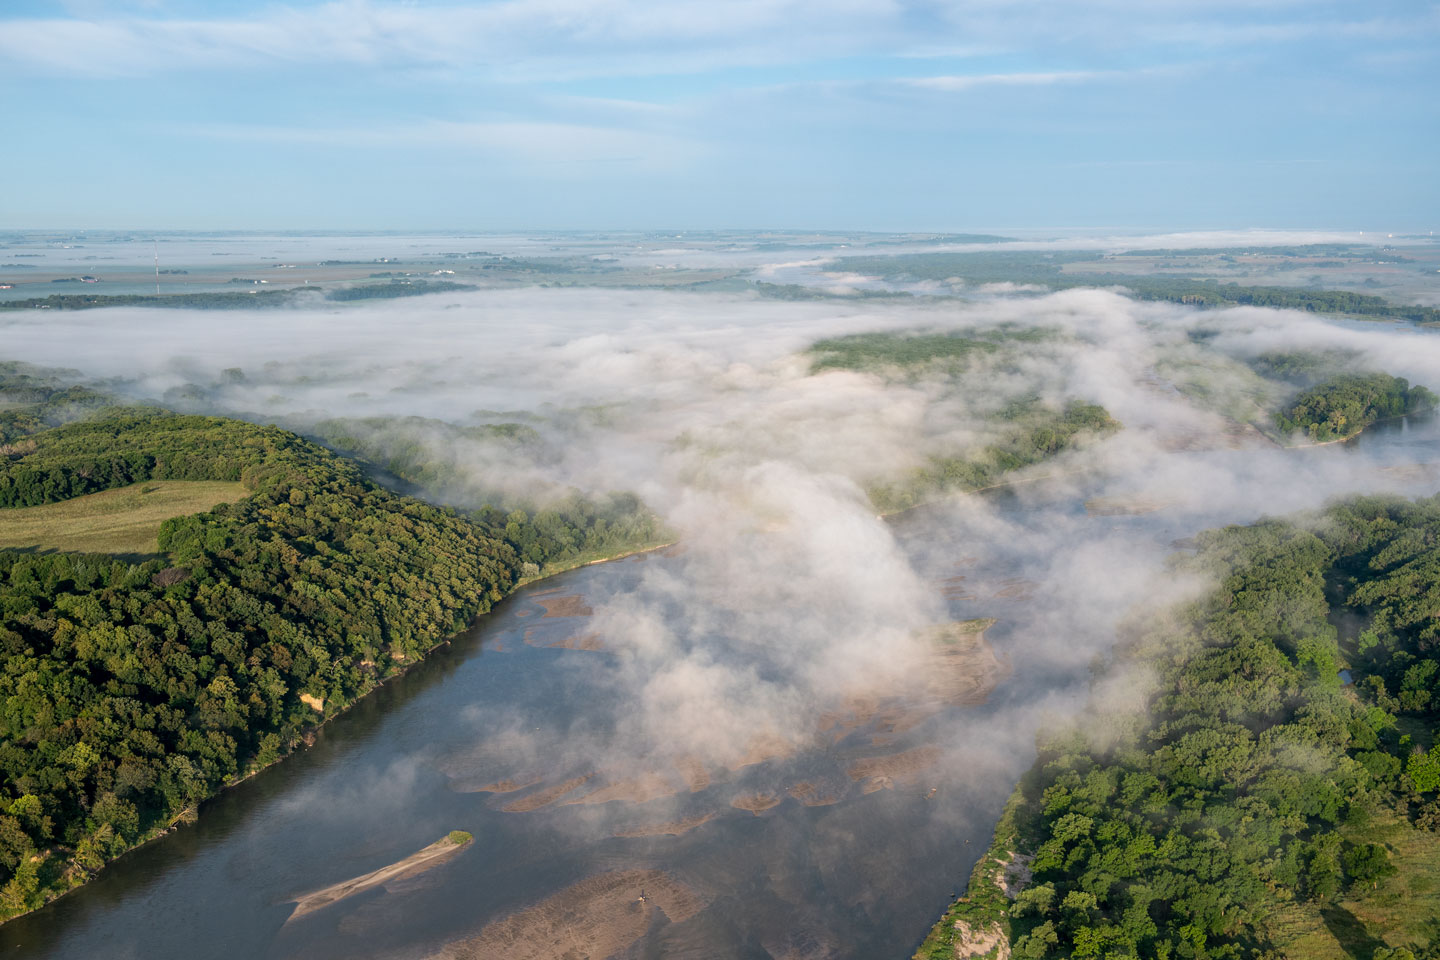 An aerial view shows fog above the Platte River.